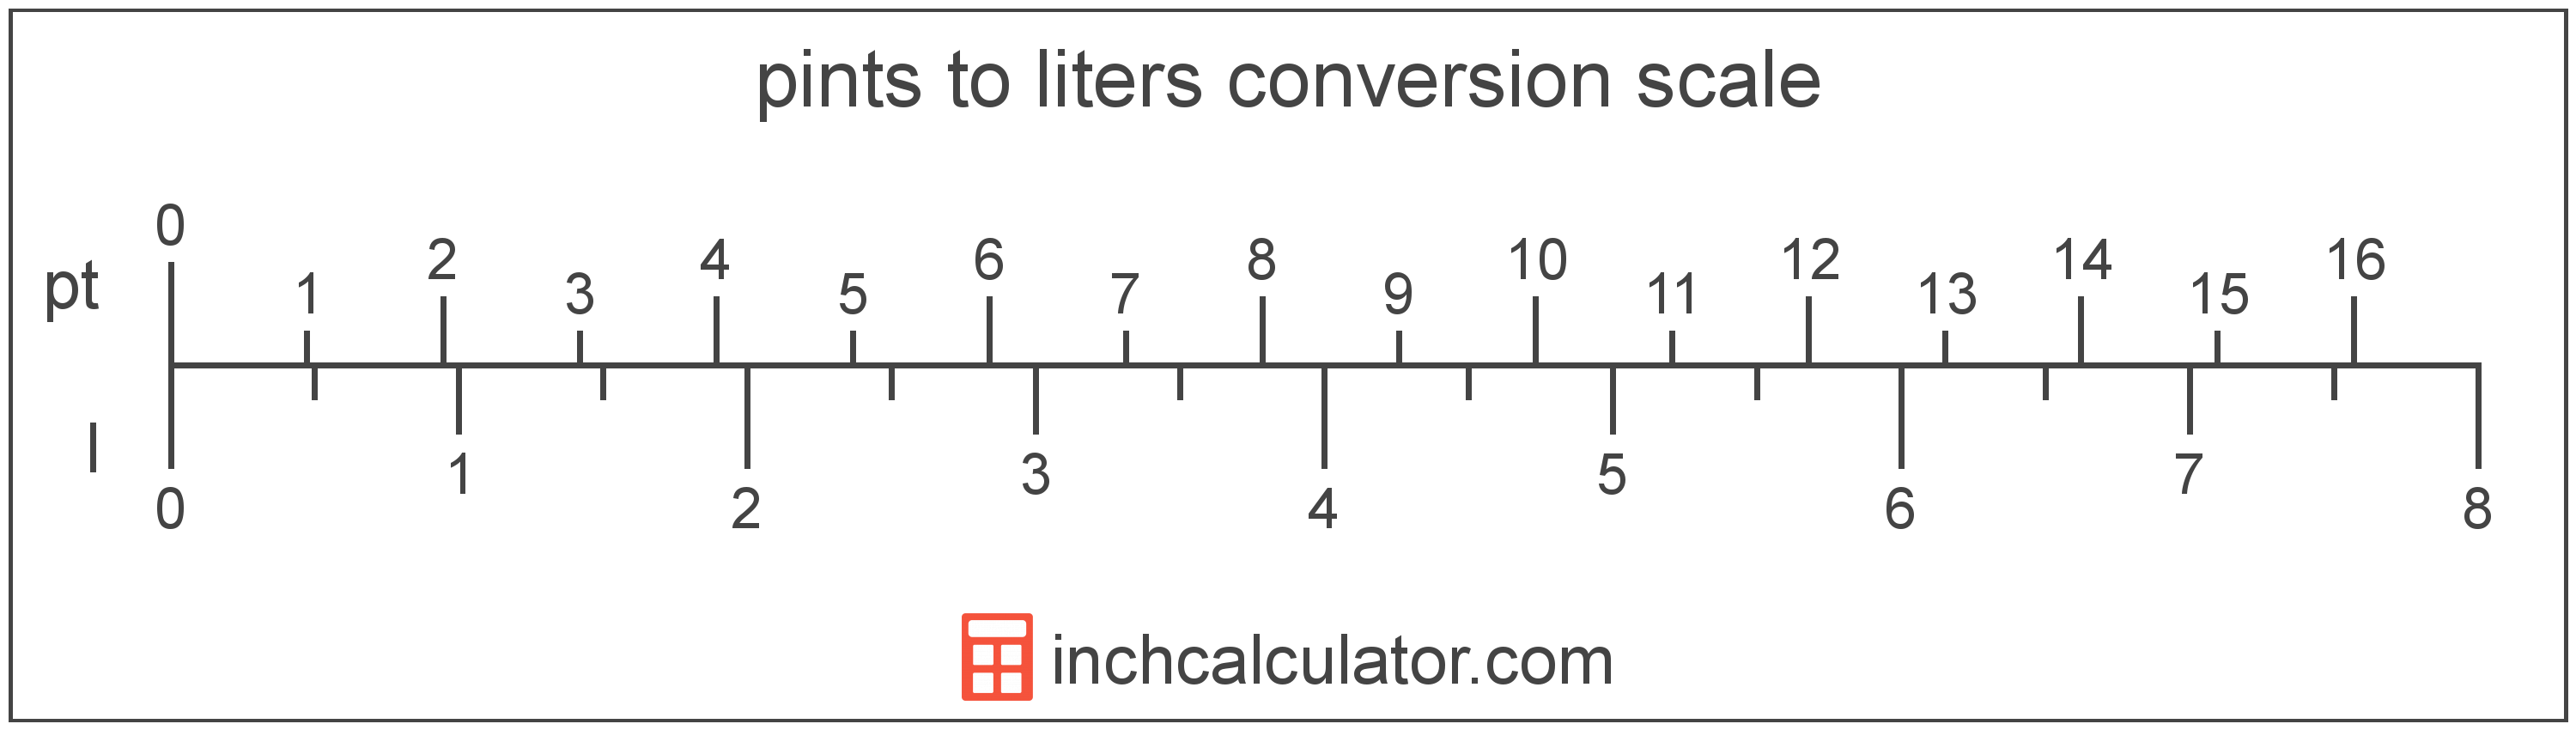 liters-to-pints-conversion-l-to-pt-inch-calculator